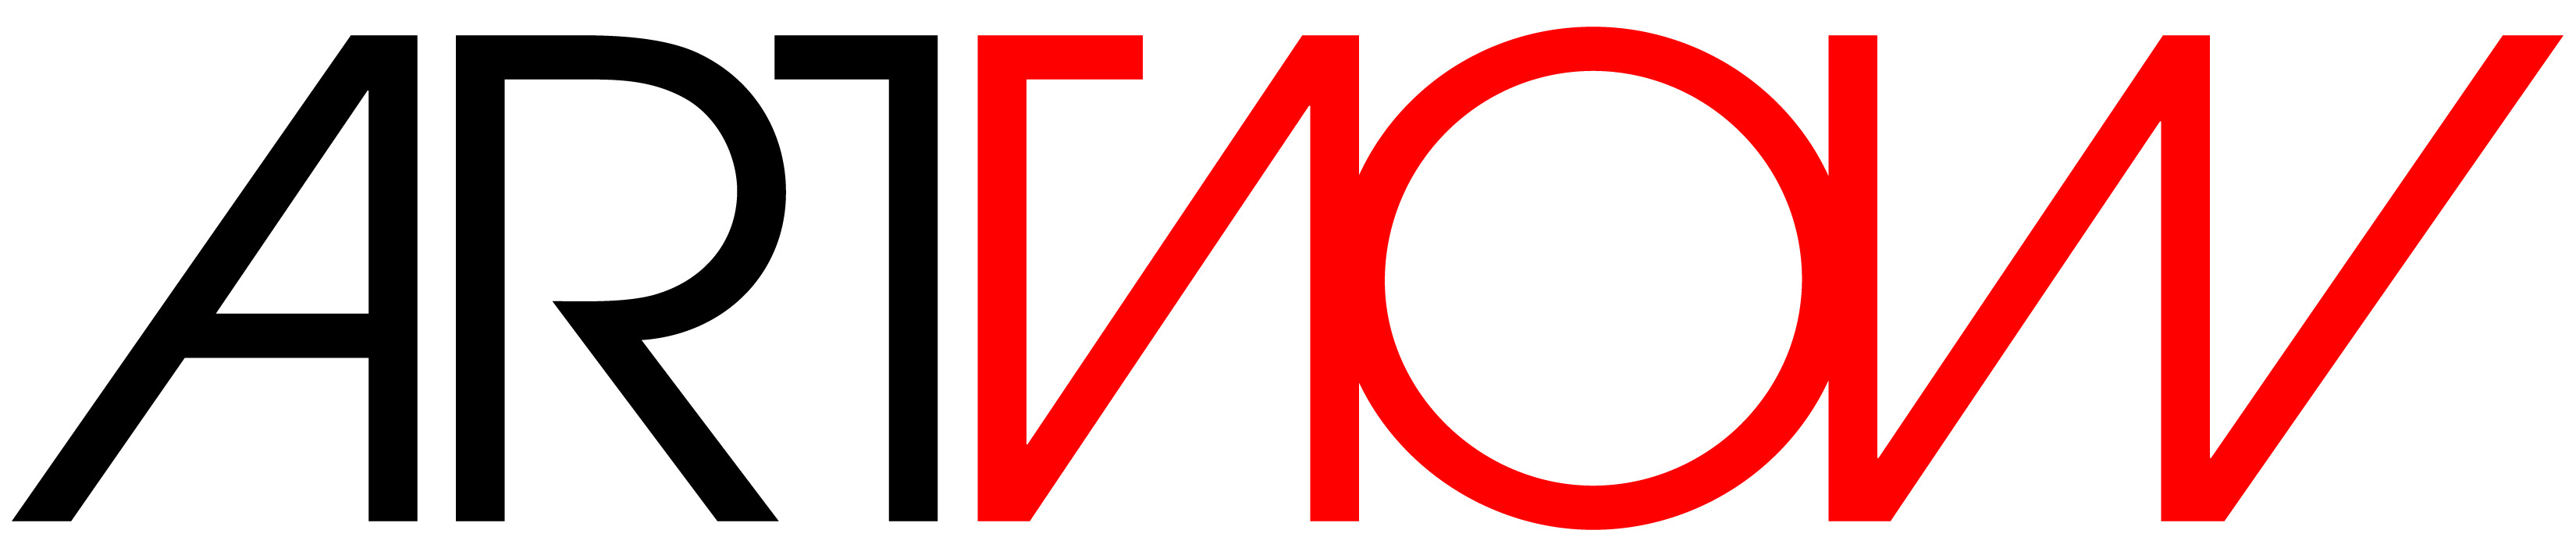 In a modern font, the words ART in black and NOW in red